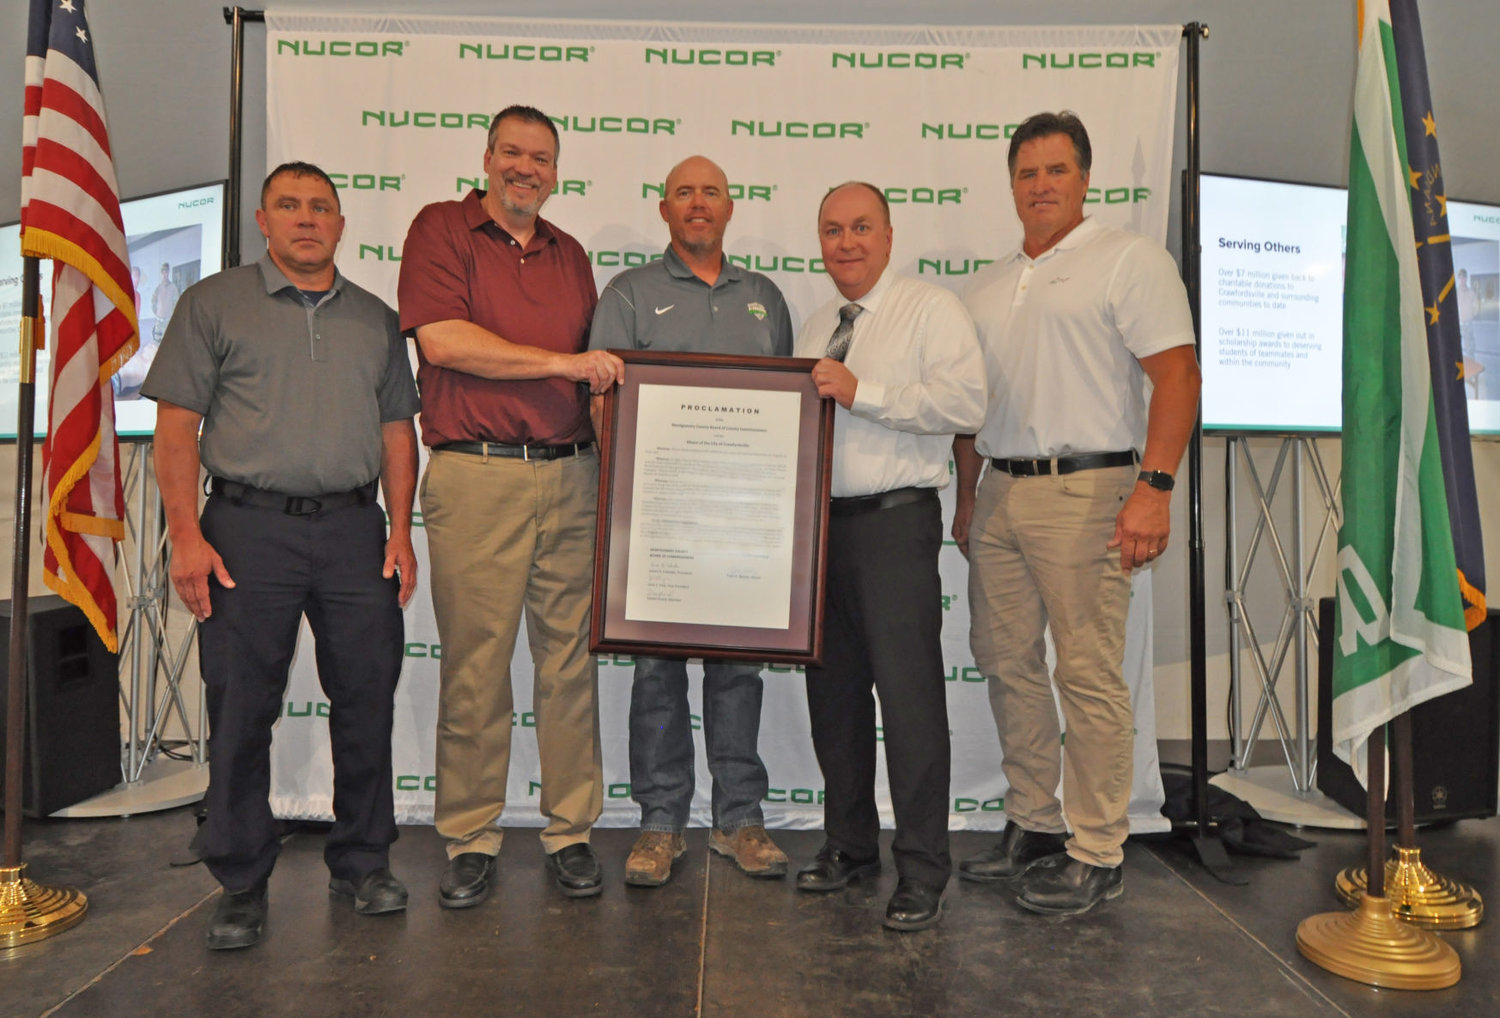 Friday was Nucor Steel Day in Crawfordsville and Montgomery County as declared Crawfordsville Mayor Todd Barton and Montgomery County Commissioners in a joint proclamation. The proclamation was presented during a 30th anniversary event celebrating three decades of Nucor Steel in Crawfordsville. Pictured from left is Montgomery County Commissioners President Jim Fulwider, Vice President and General Manager of Nucor Steel Indiana Dan Needham, County Commissioner Dan Guard, Barton and County Commissioner John Frey.